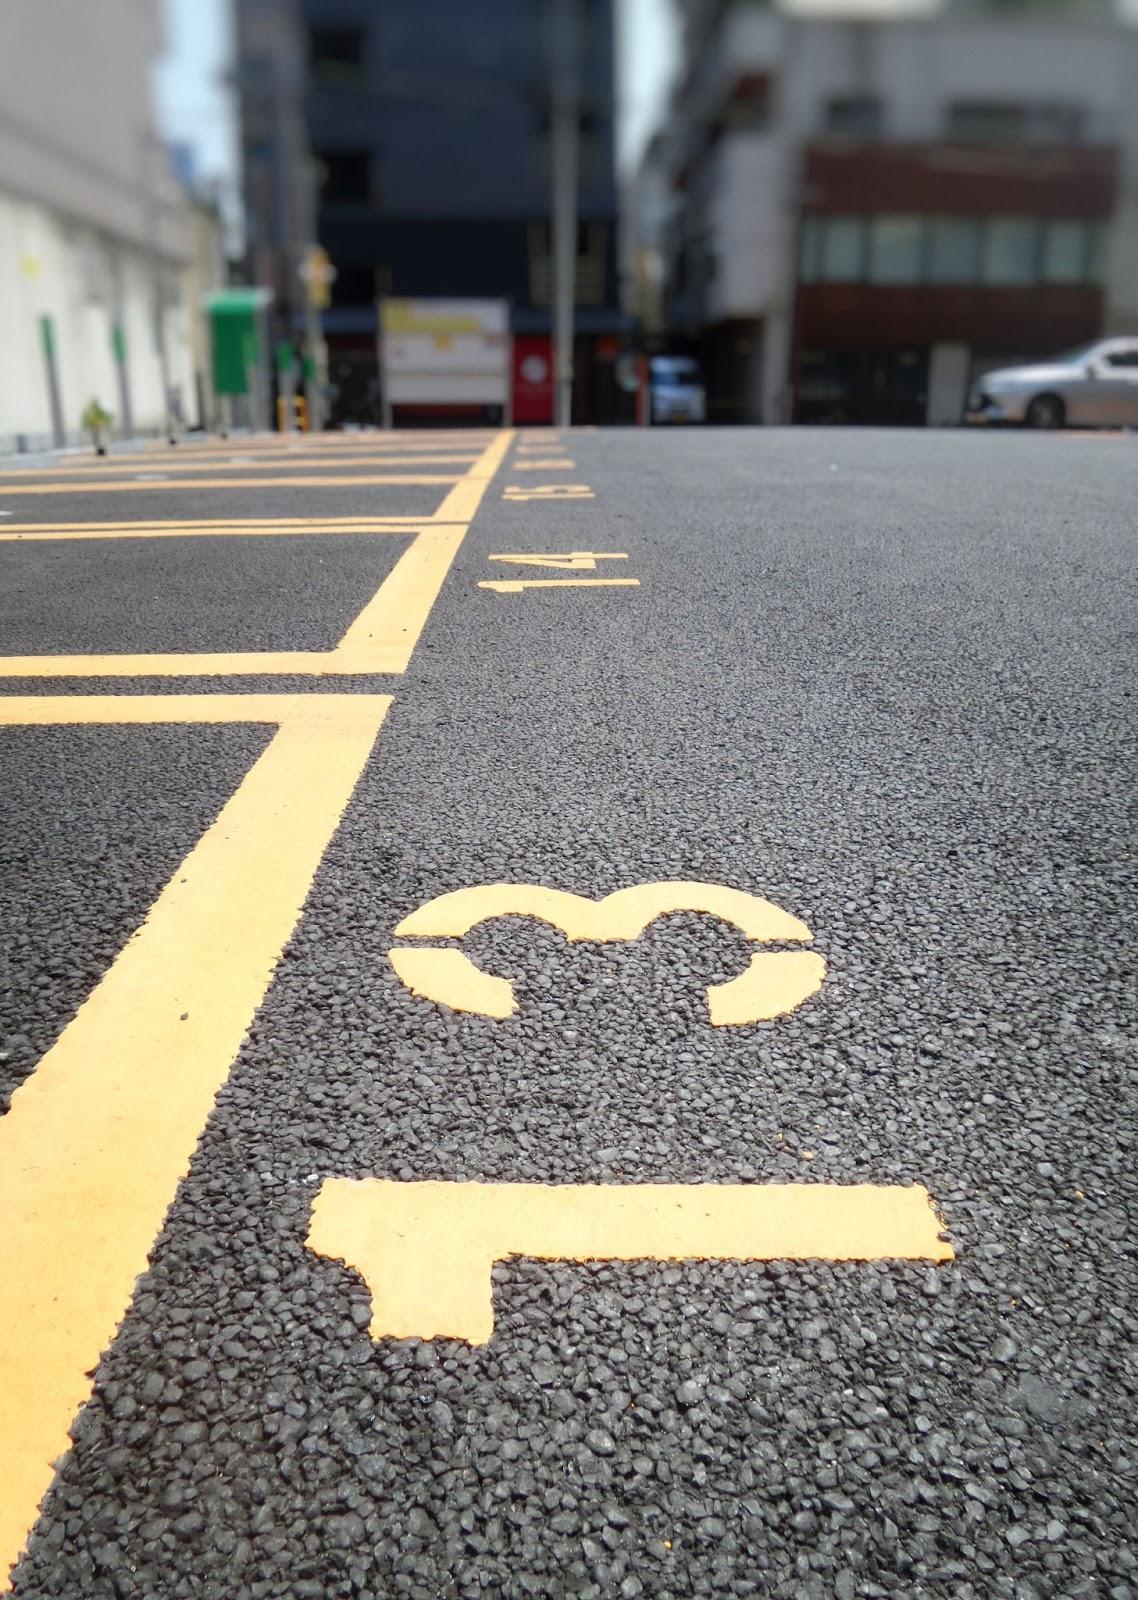 A close-up of parking bays in the city